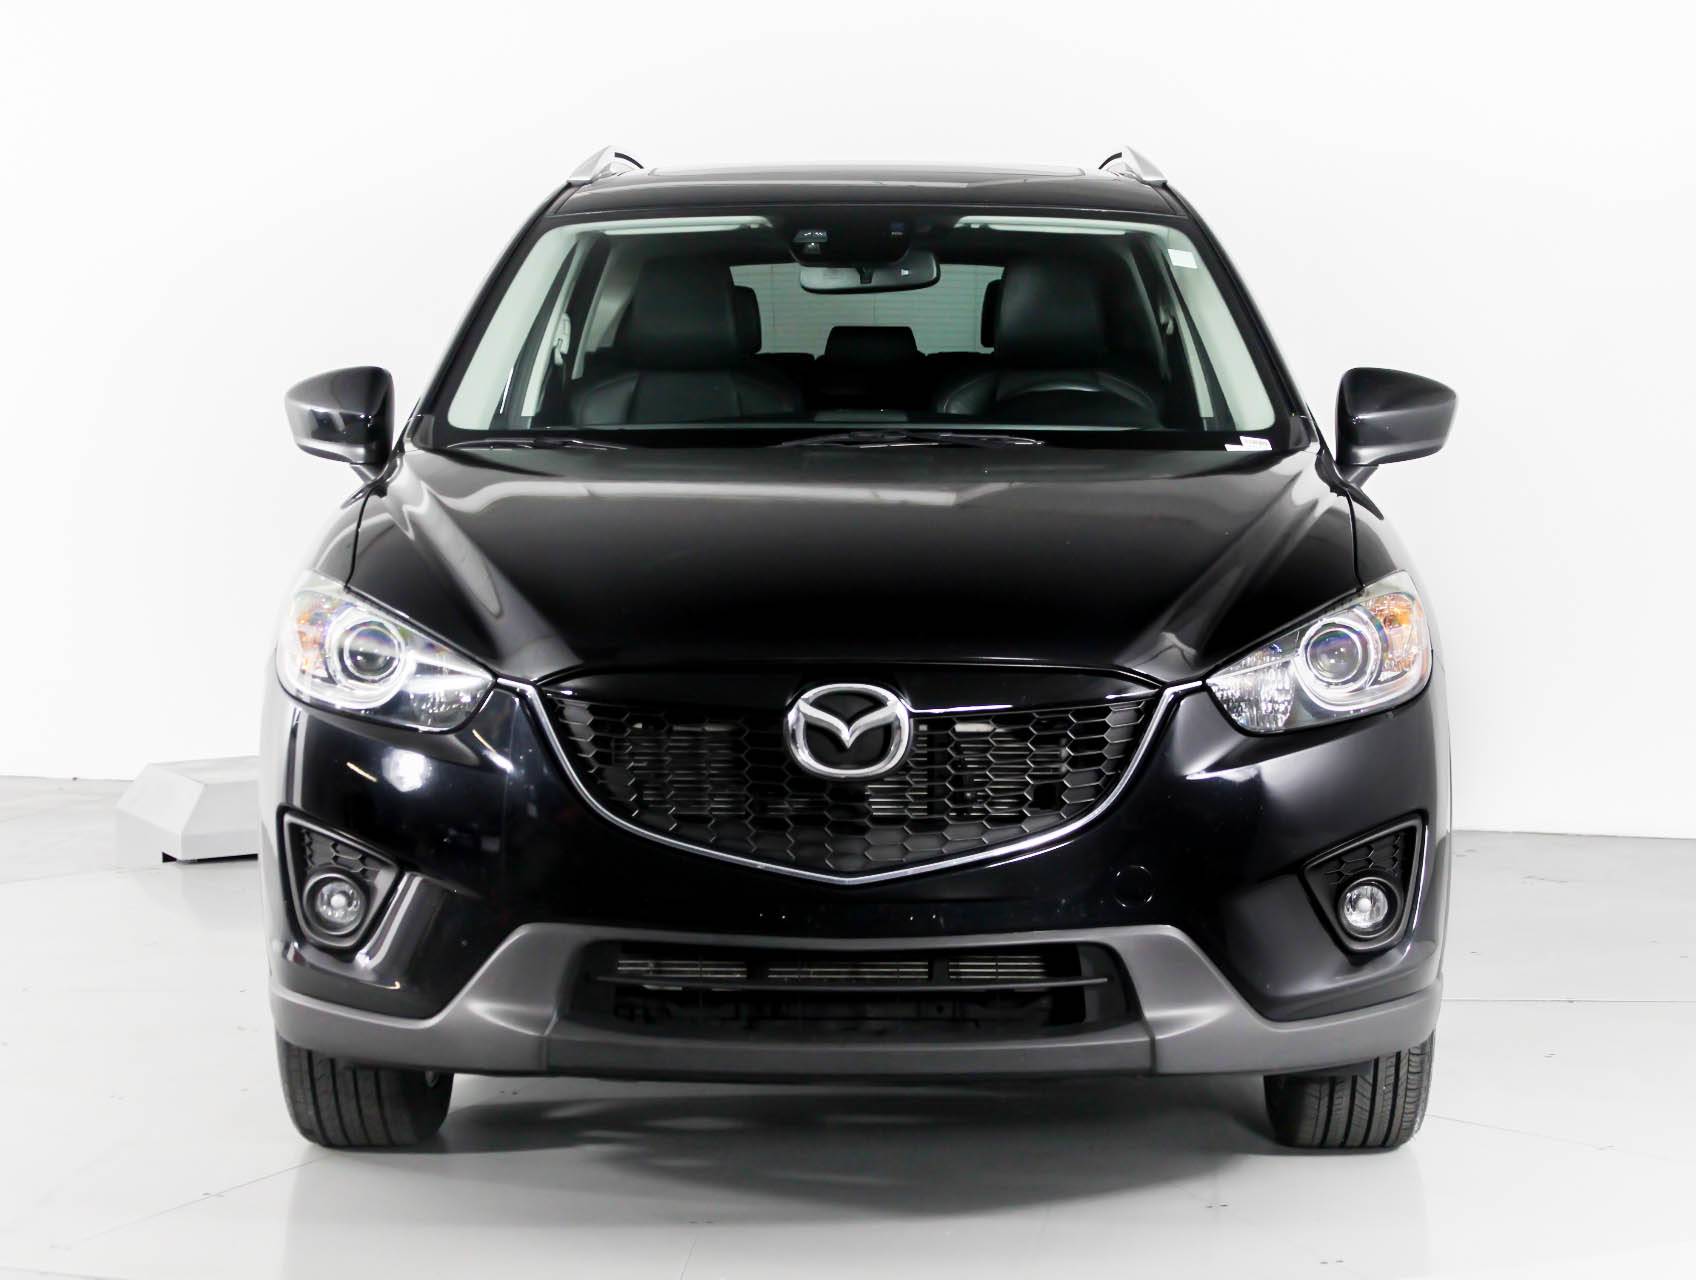 Florida Fine Cars - Used MAZDA CX 5 2014 WEST PALM GRAND TOURING